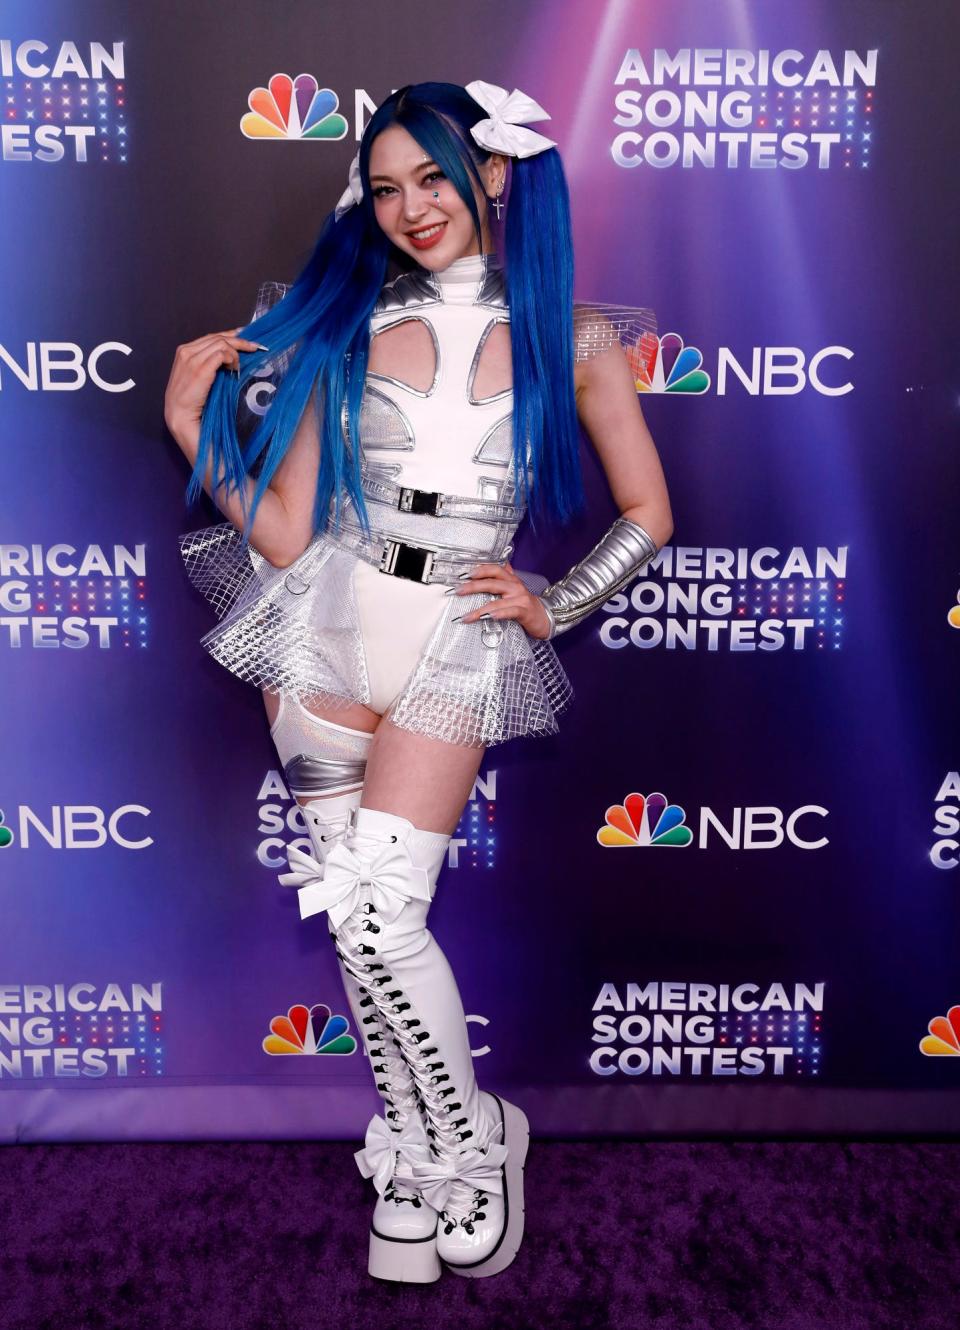 Tulsa native and rising K-pop star AleXa poses for a photo during the premiere episode of the "American Song Contest" Monday, March 21, 2022. AleXa is representing the state of Oklahoma on the new music performance series.